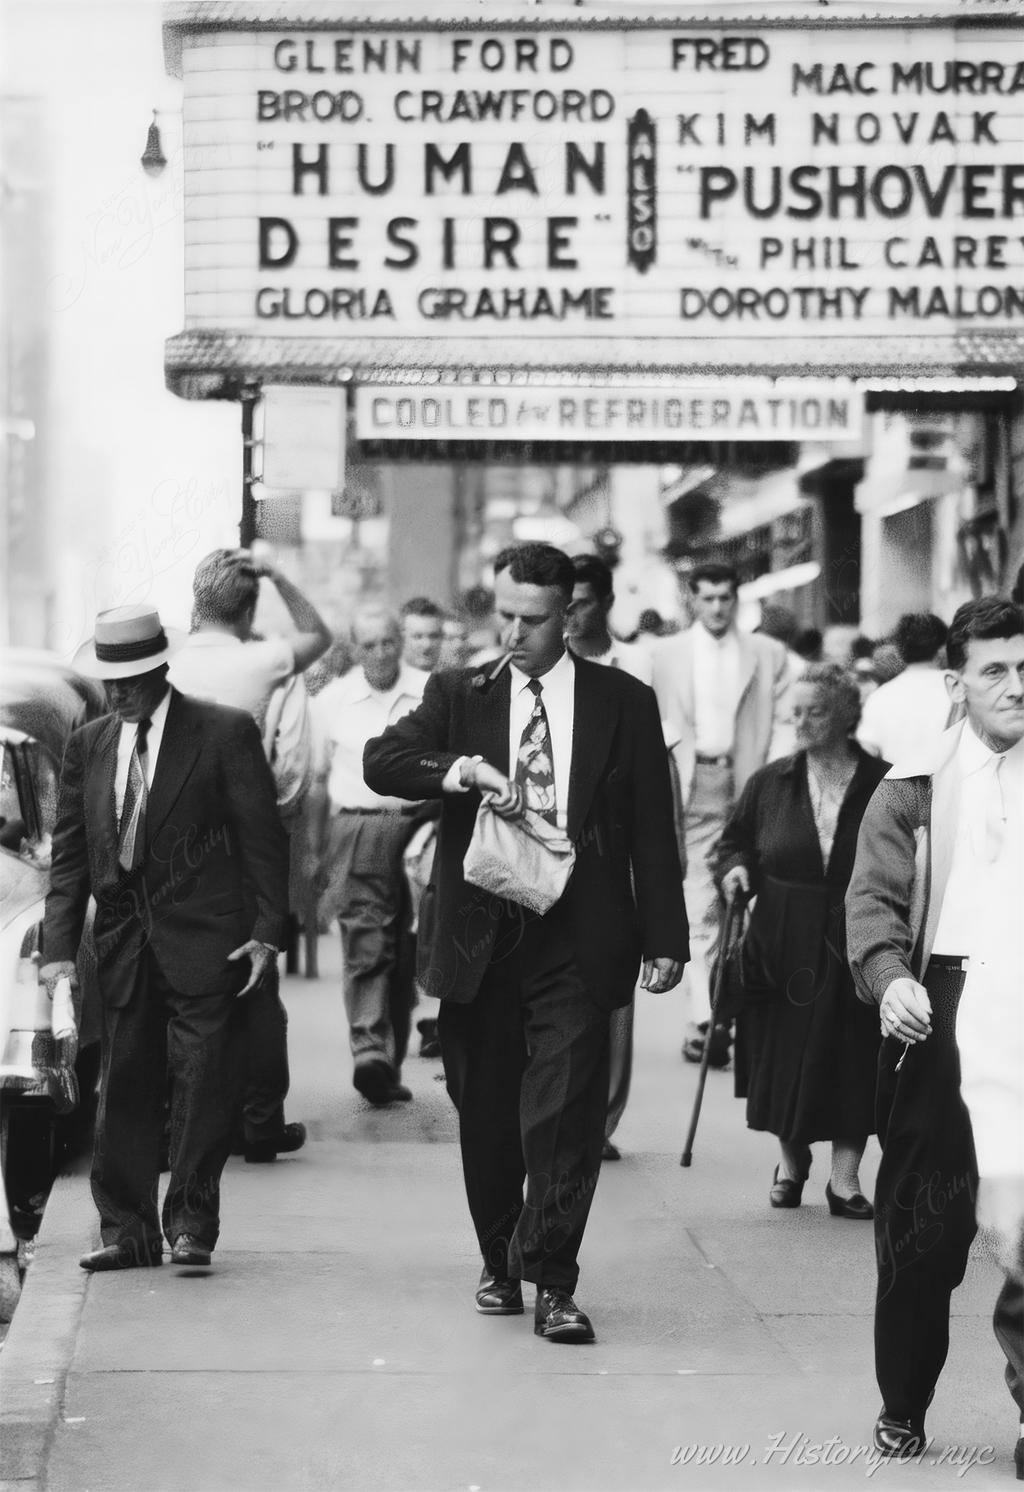 Photograph of people walking on a Manhattan sidewalk with several theatre marquees visible in the background.